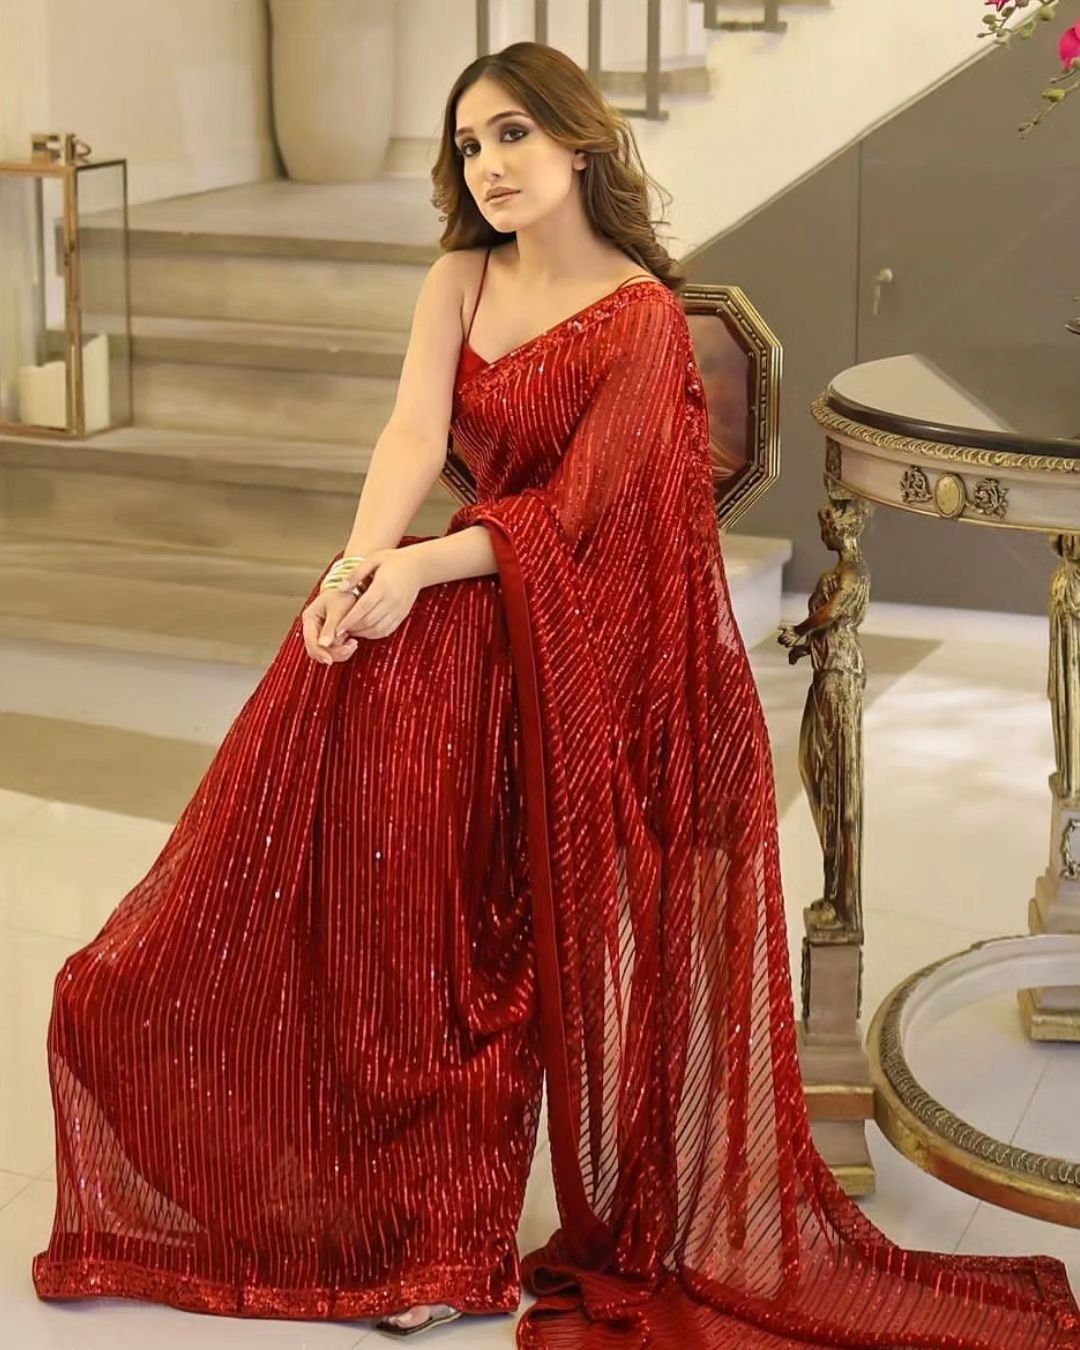 Aiza Awan Dazzles in a Sparkly Red Saree with Deep-Neck Blouse - Lens